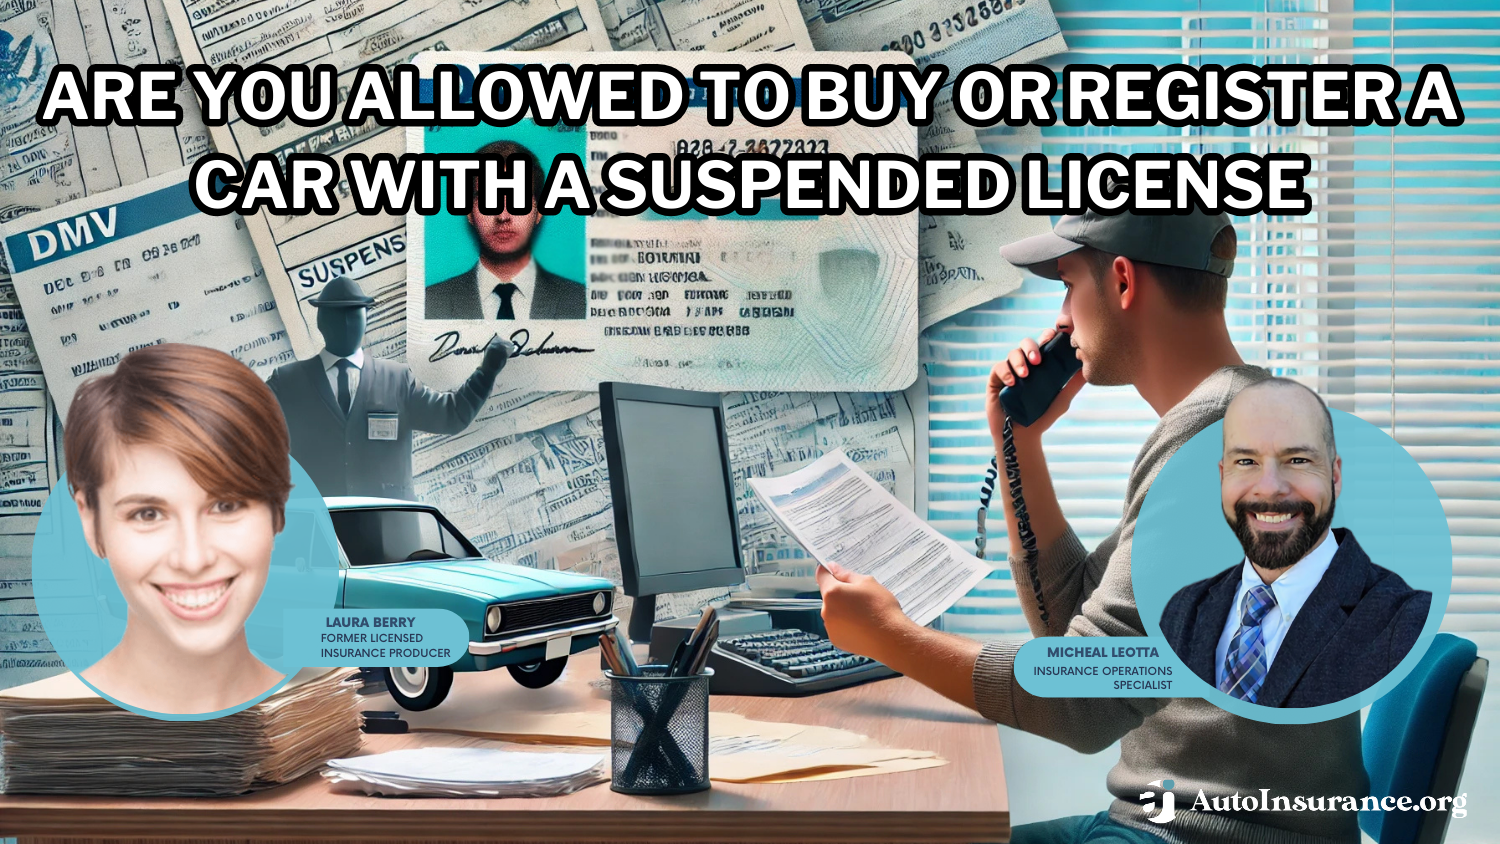 Are you allowed to buy or register a car with a suspended license?